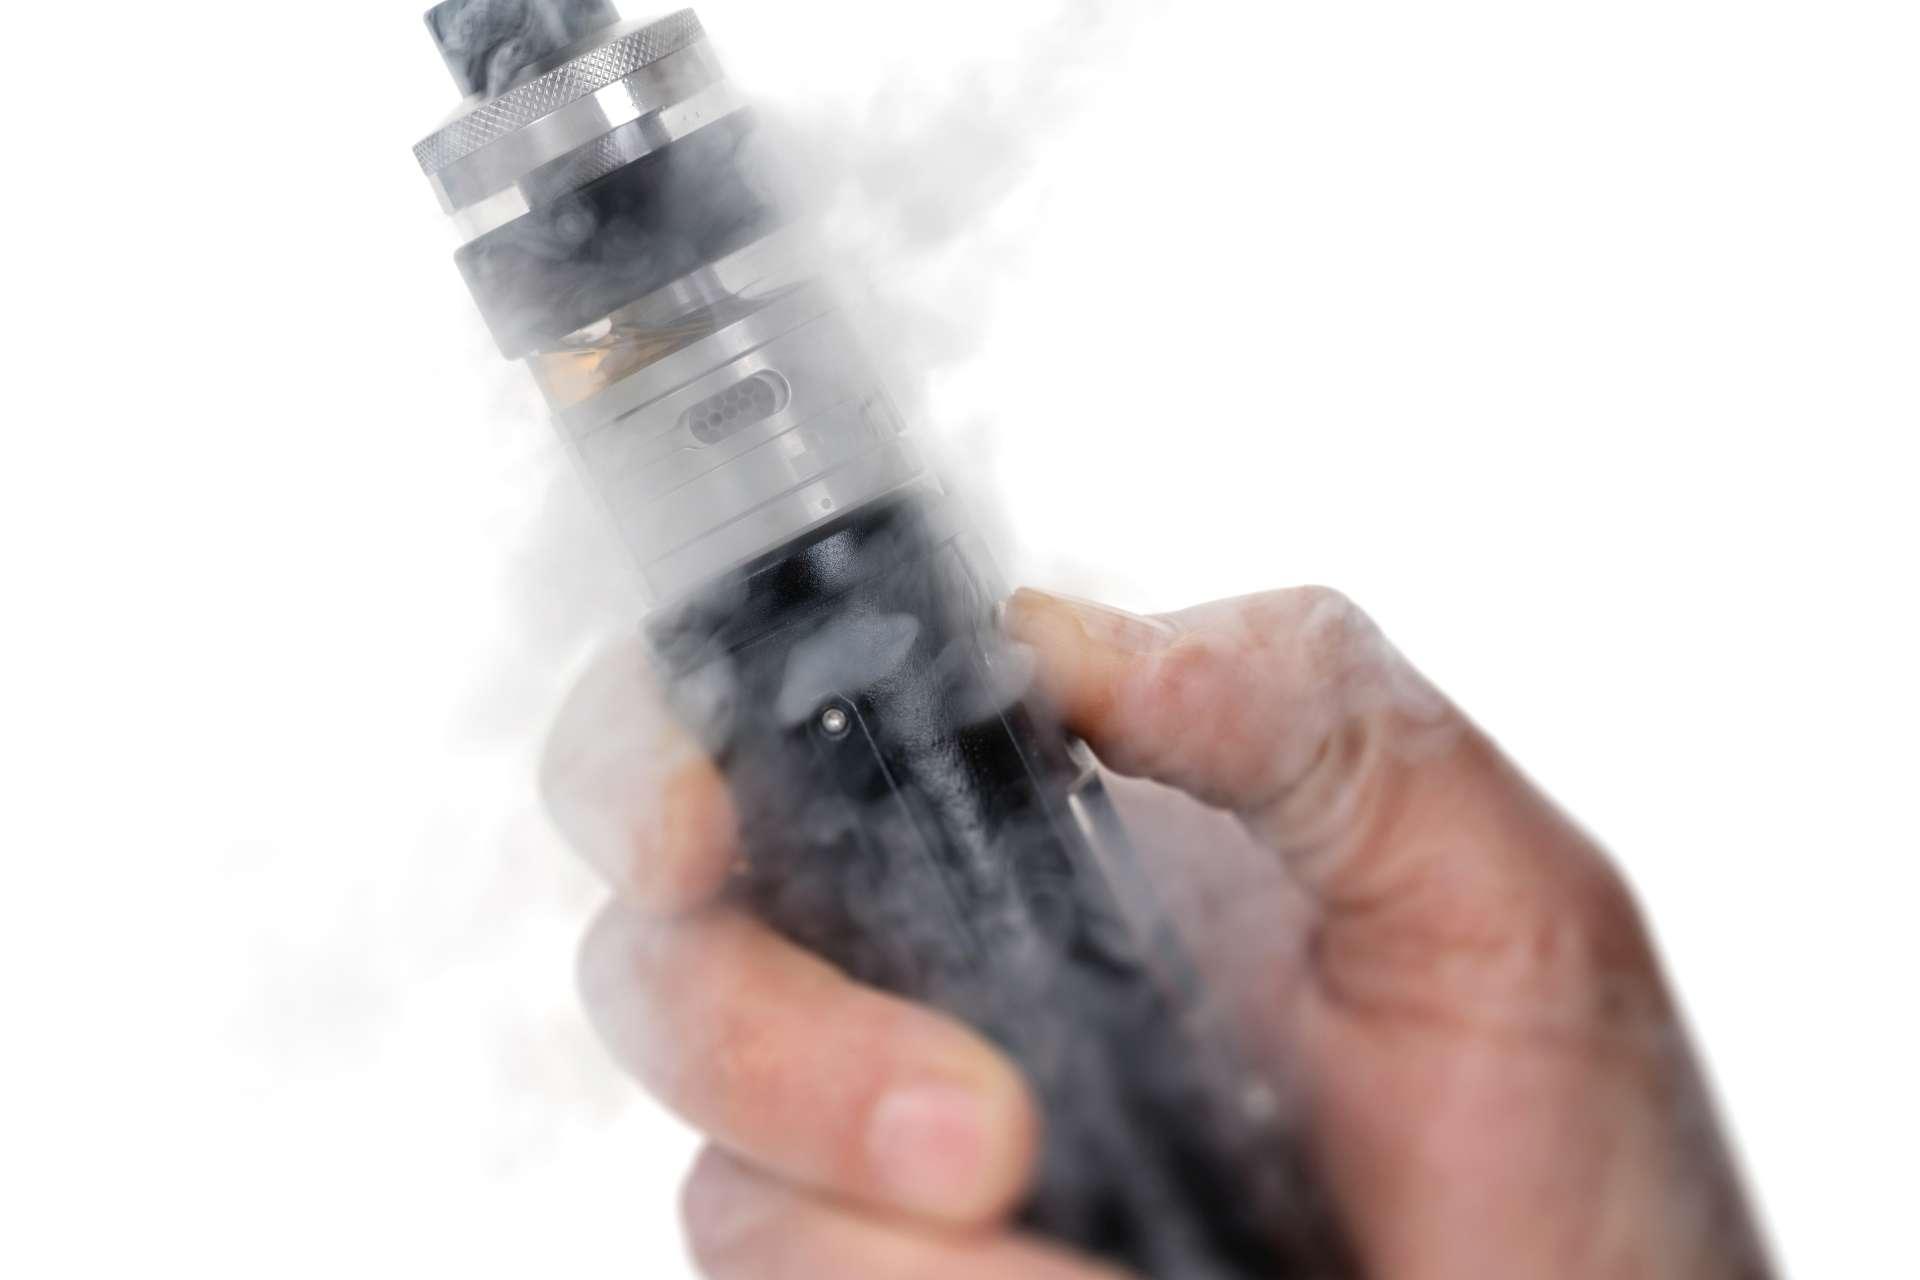 lectronic cigarette in the man's hand